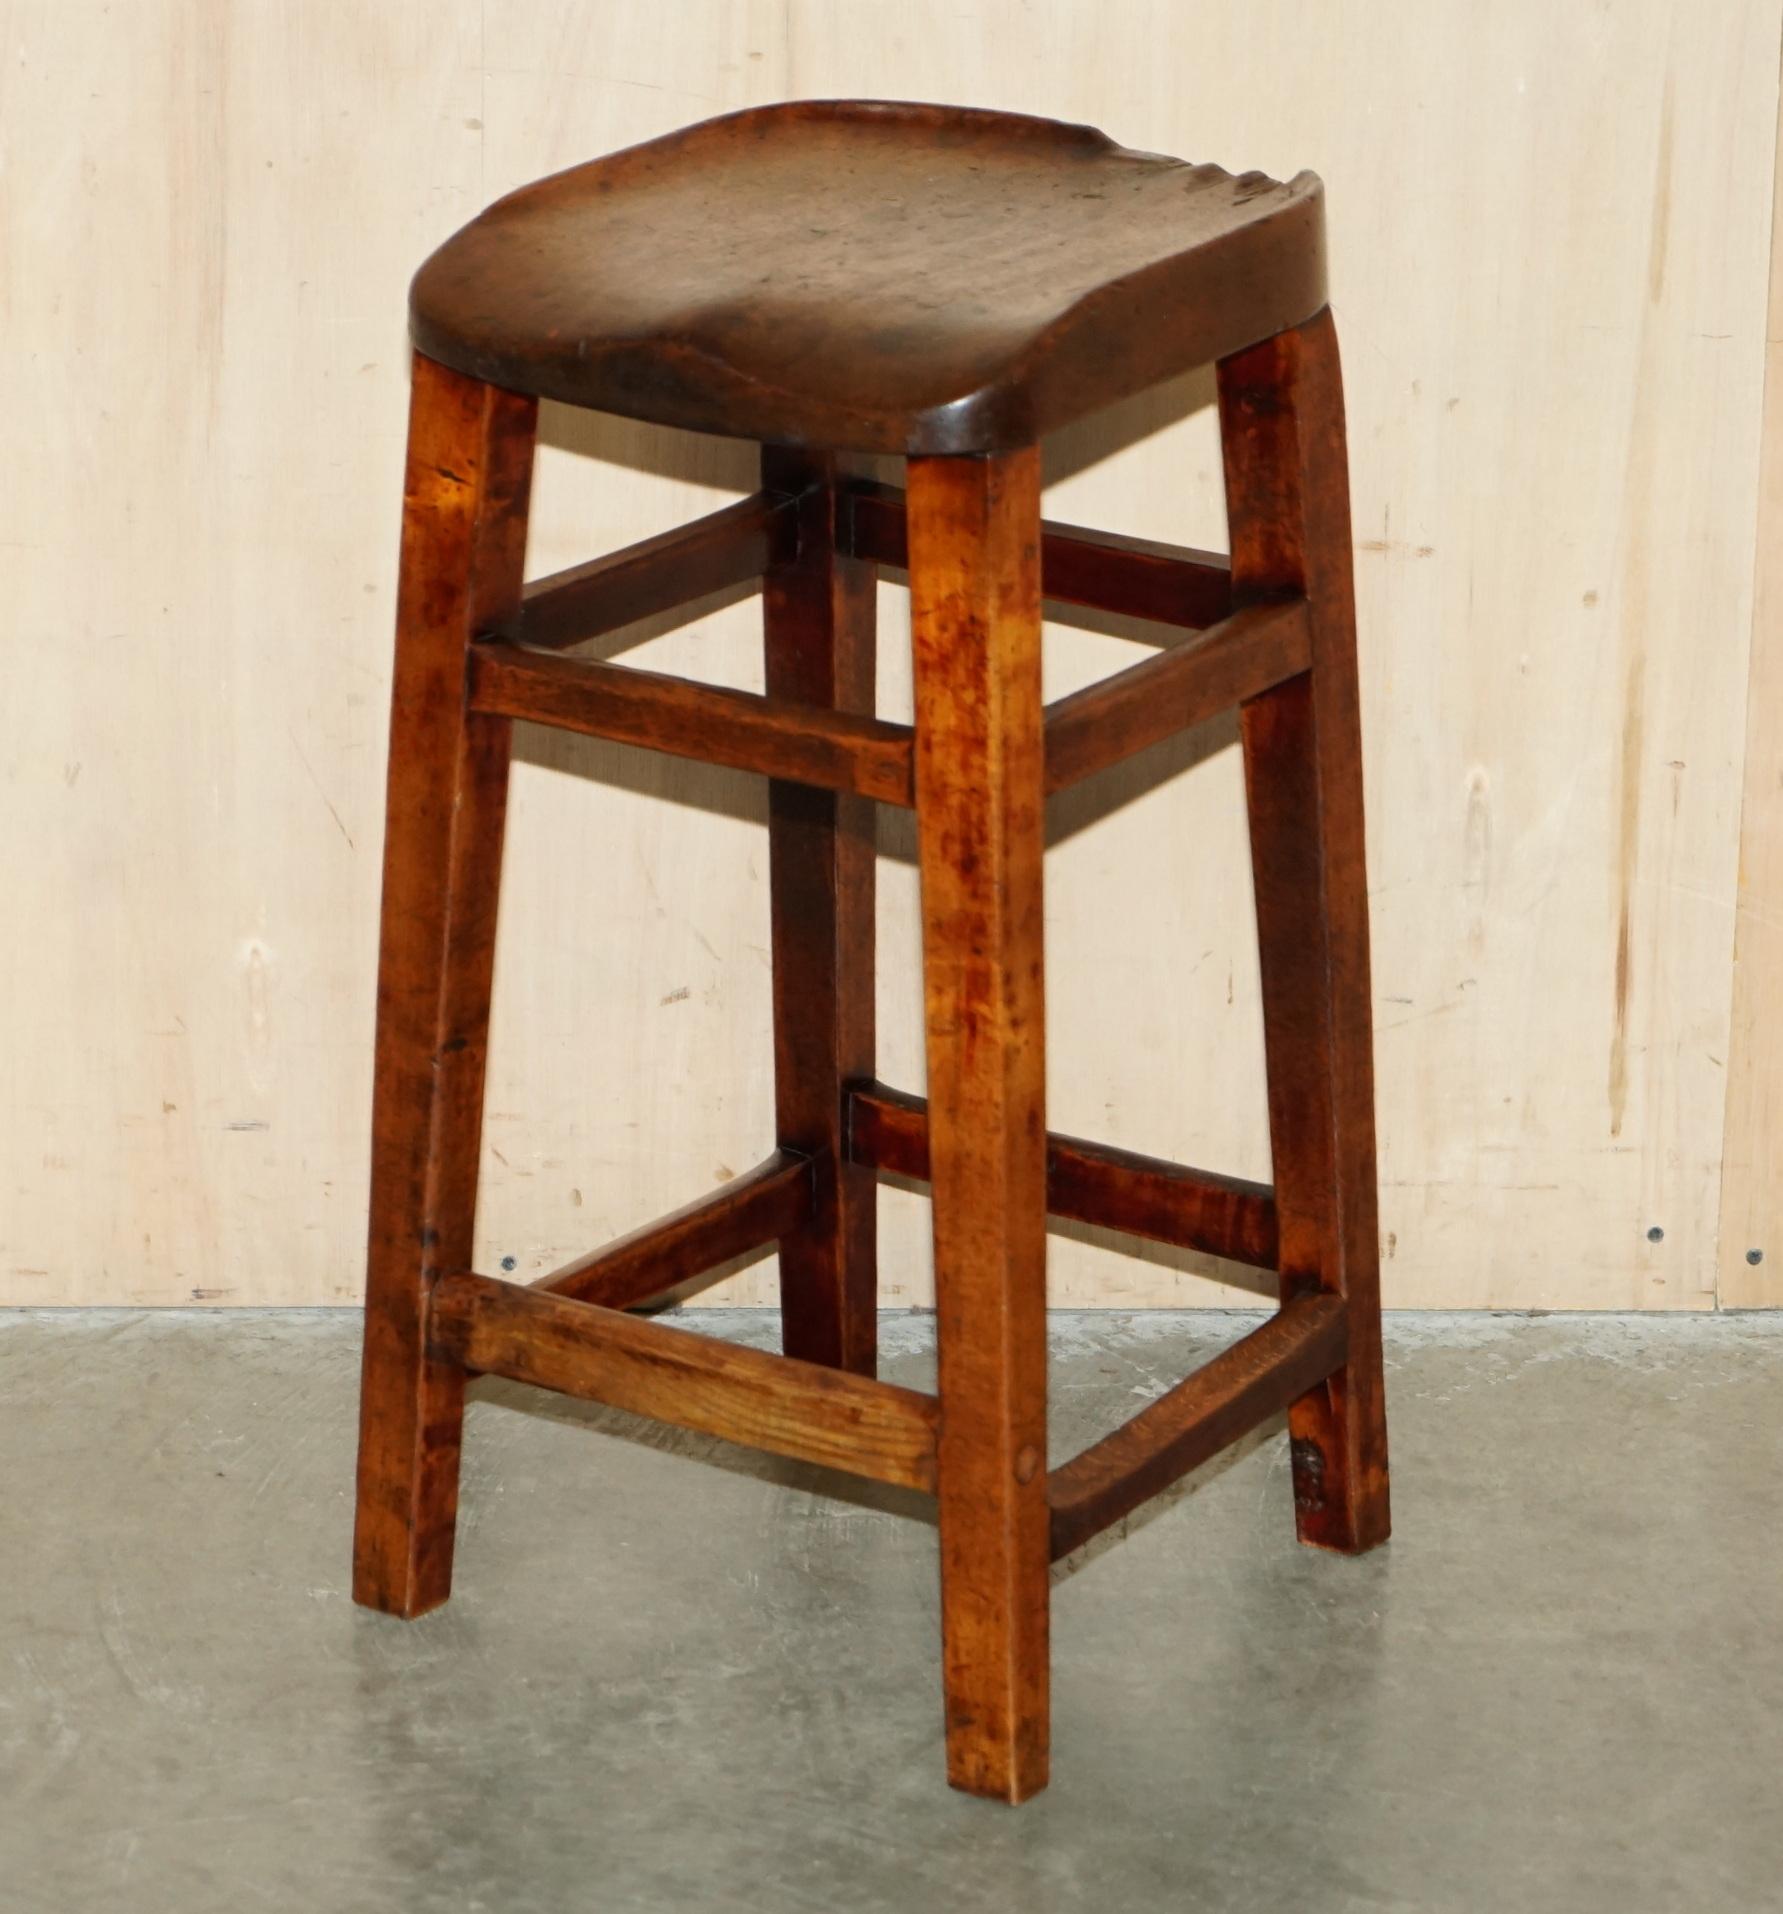 Royal House Antiques

Royal House Antiques is delighted to offer for sale this stunning 19th century English Fruitwood Draftsman Artist bar stool with beautifully sculpted top

Please note the delivery fee listed is just a guide, it covers within